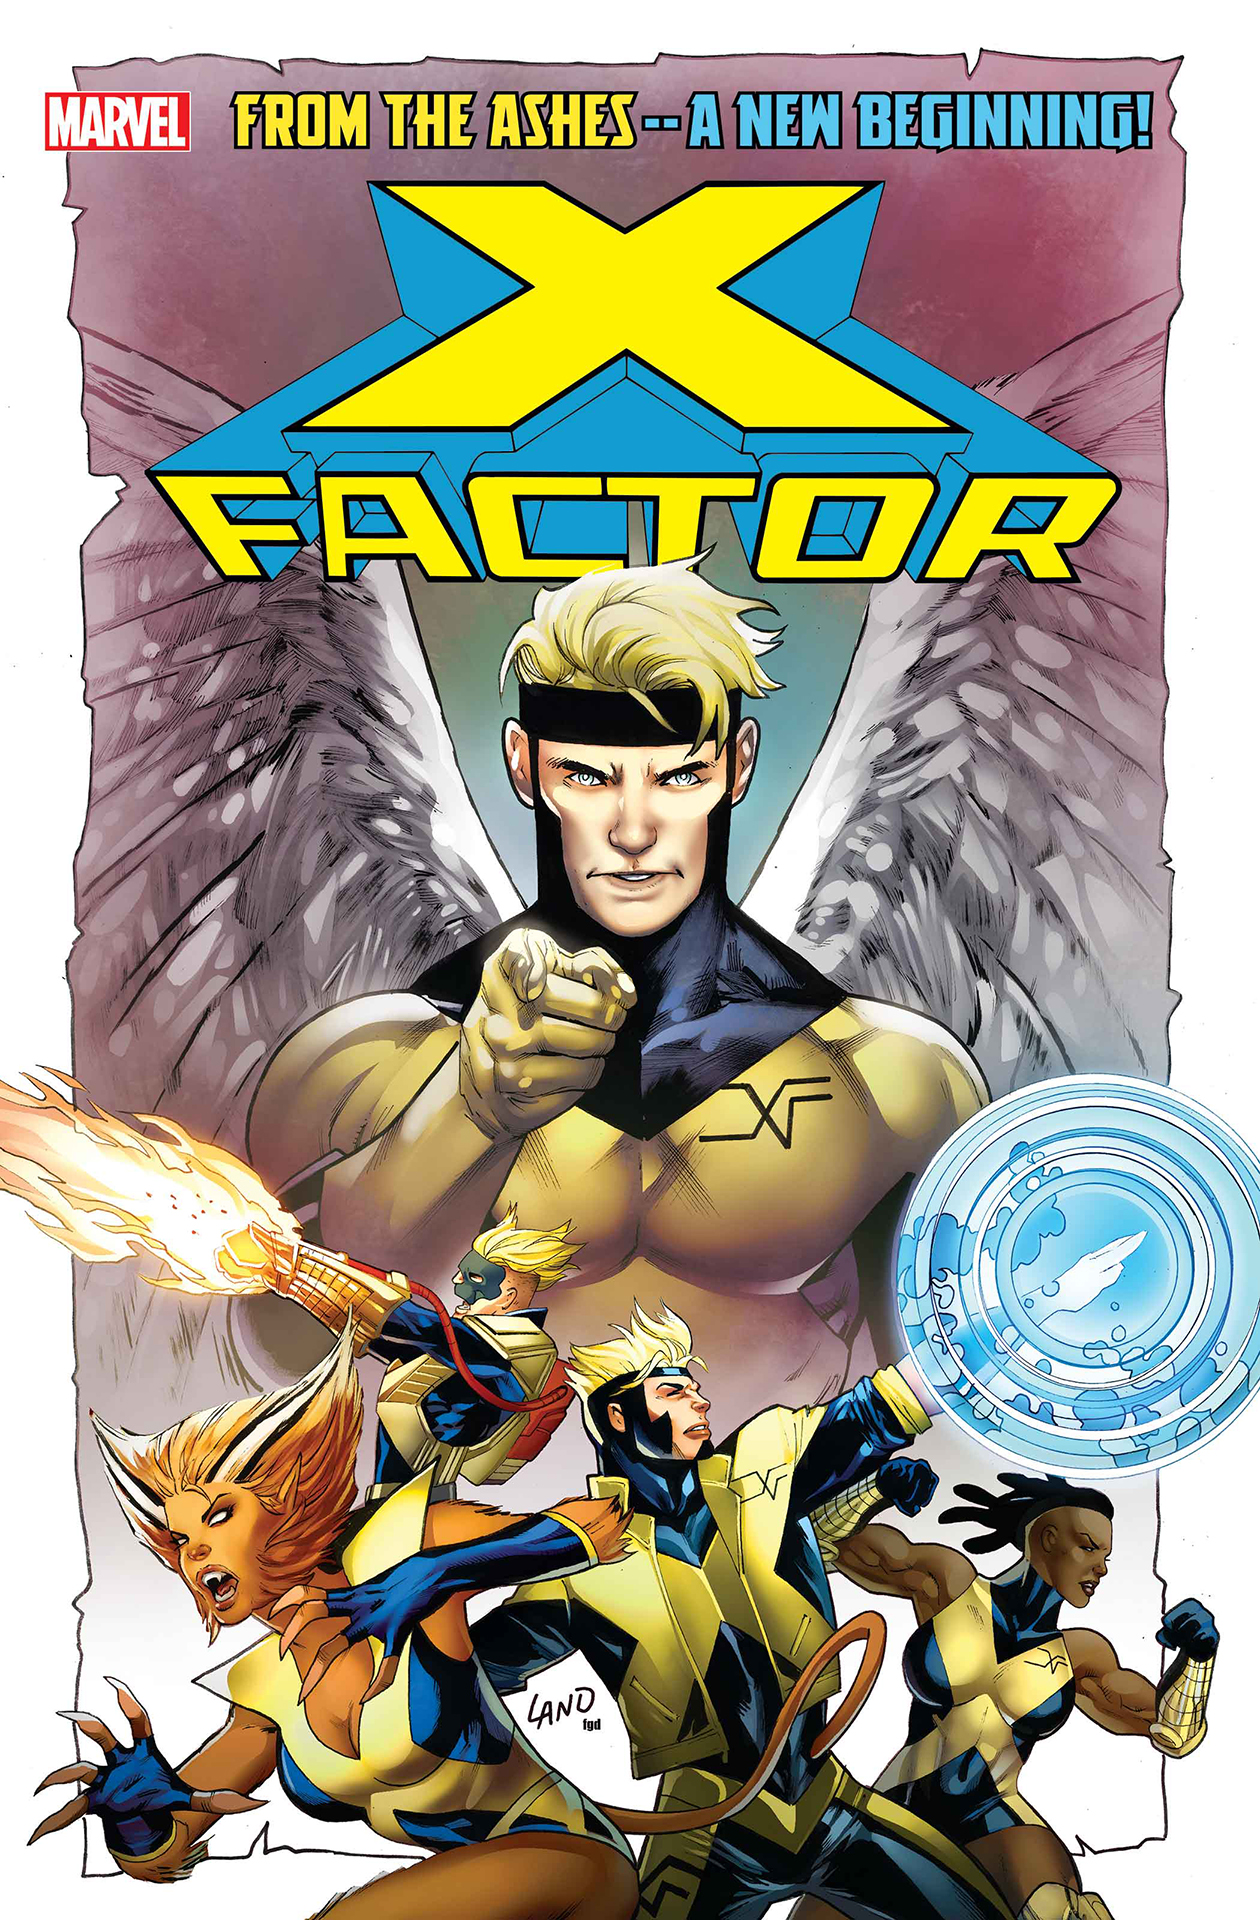 X-Factor joins the new X-Men line this summer as a team of government sanctioned mutant influencers